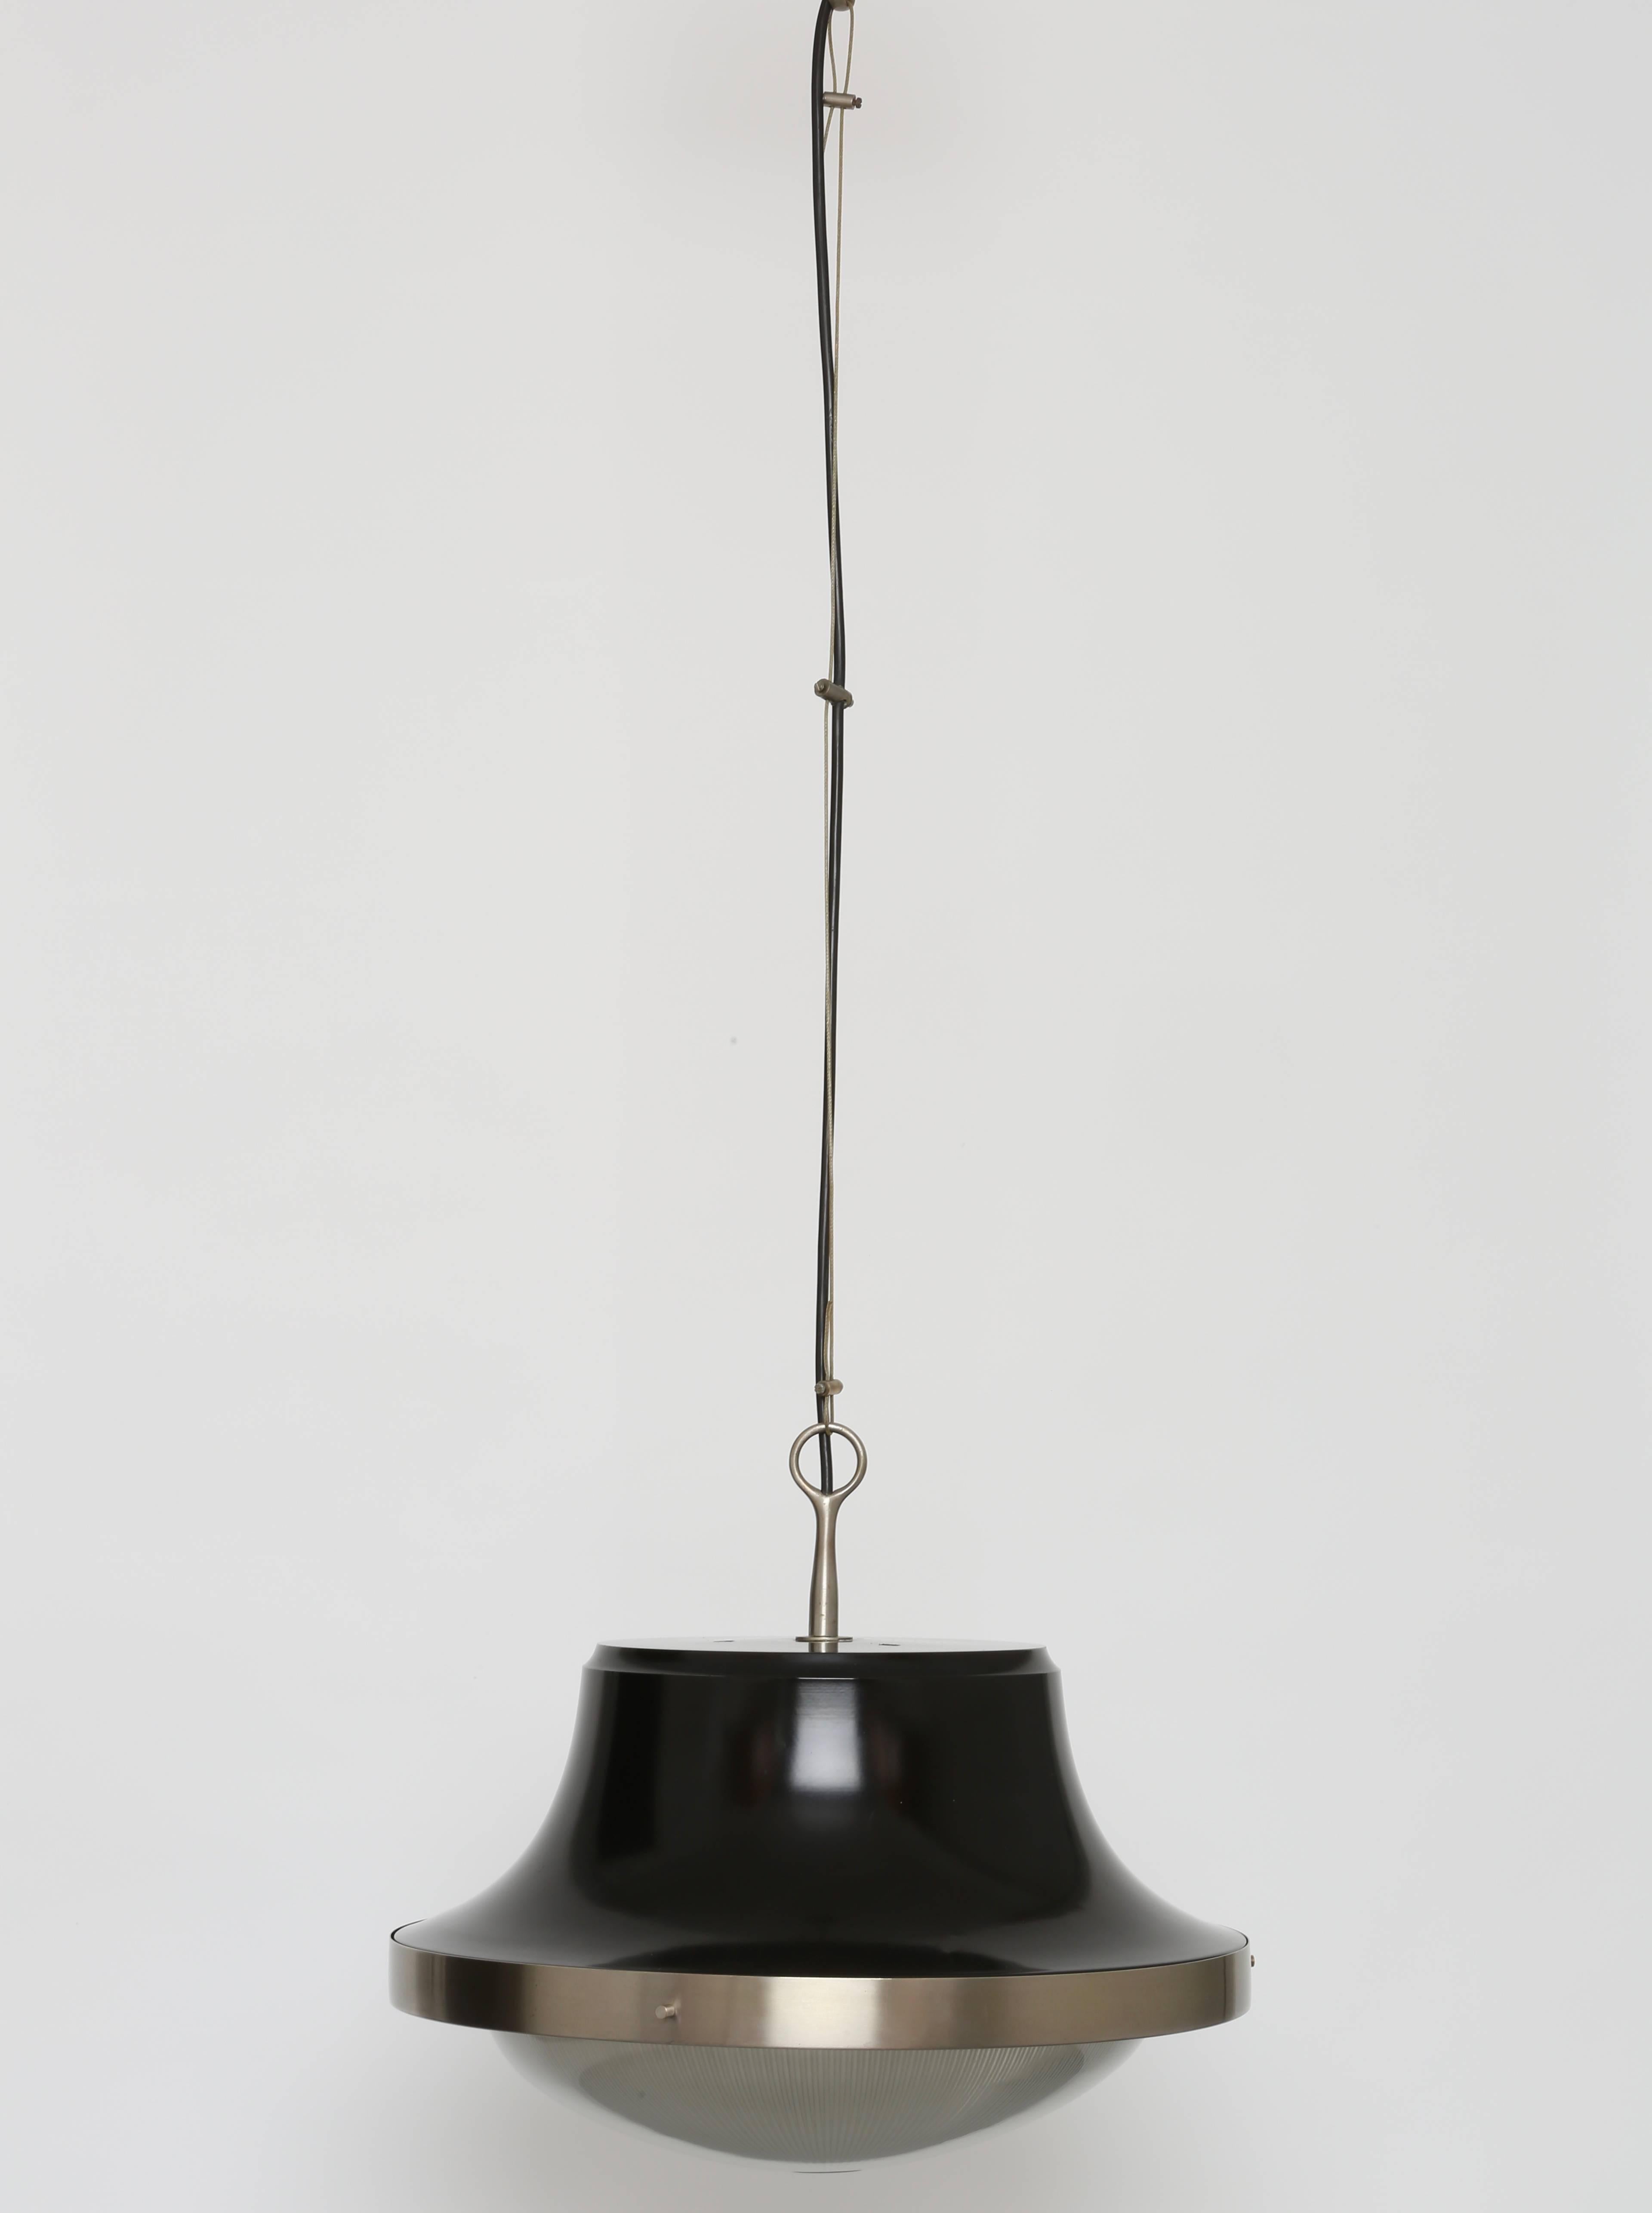 Sergio Mazza ceiling pendant model Tau made with textured glass, black painted metal and nickel-plated brass.
One medium base socket. Height adjustable.